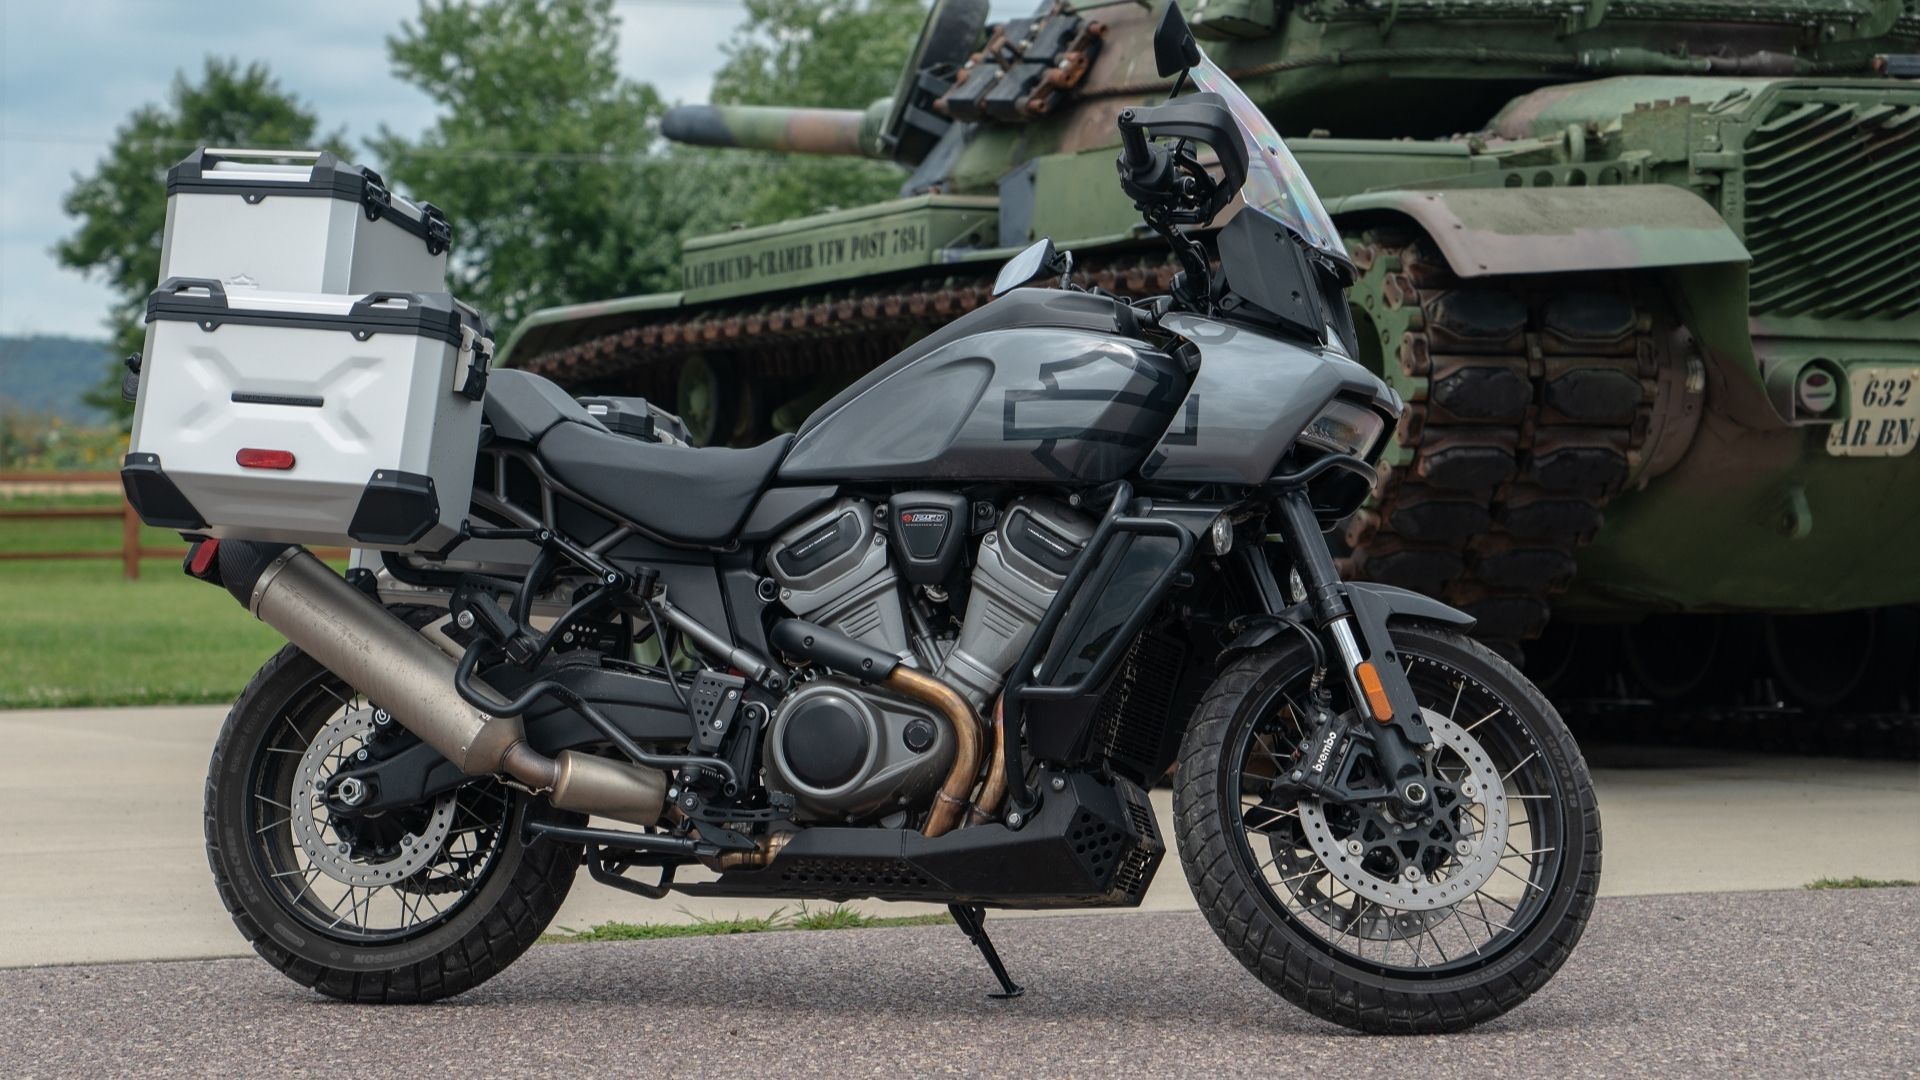 Harley-Davidson's New Adventure Motorcycle Is Truly One of a Kind